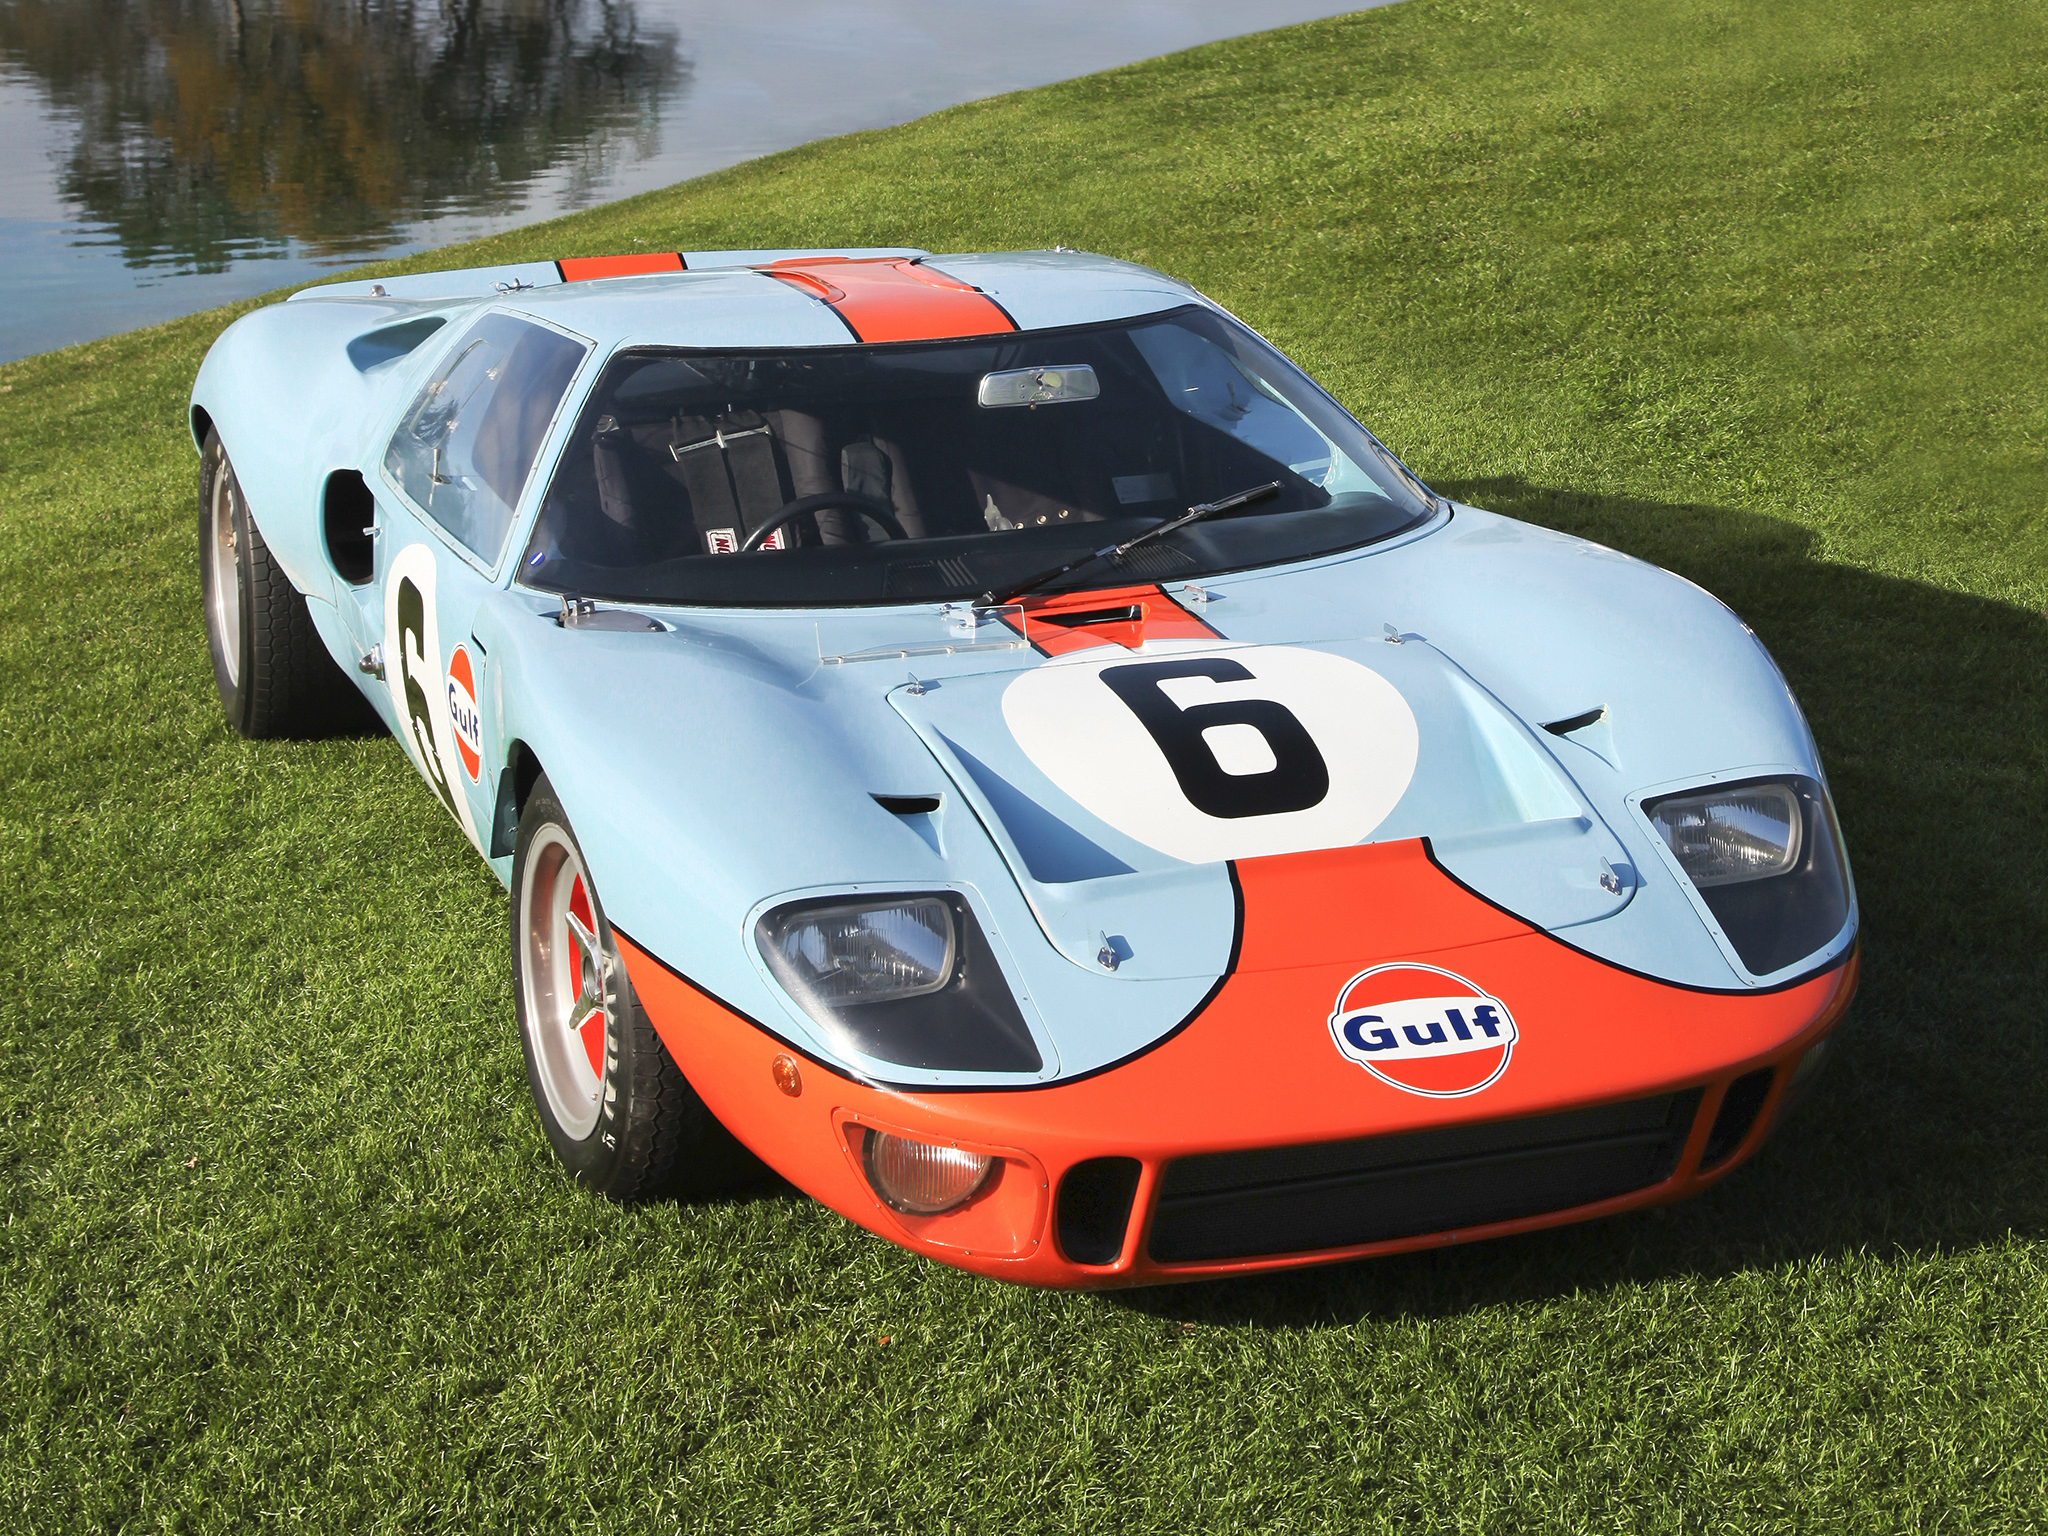 1968, Ford, Gt40, Gulf oil, Le mans, Race, Racing, Supercar, Classic